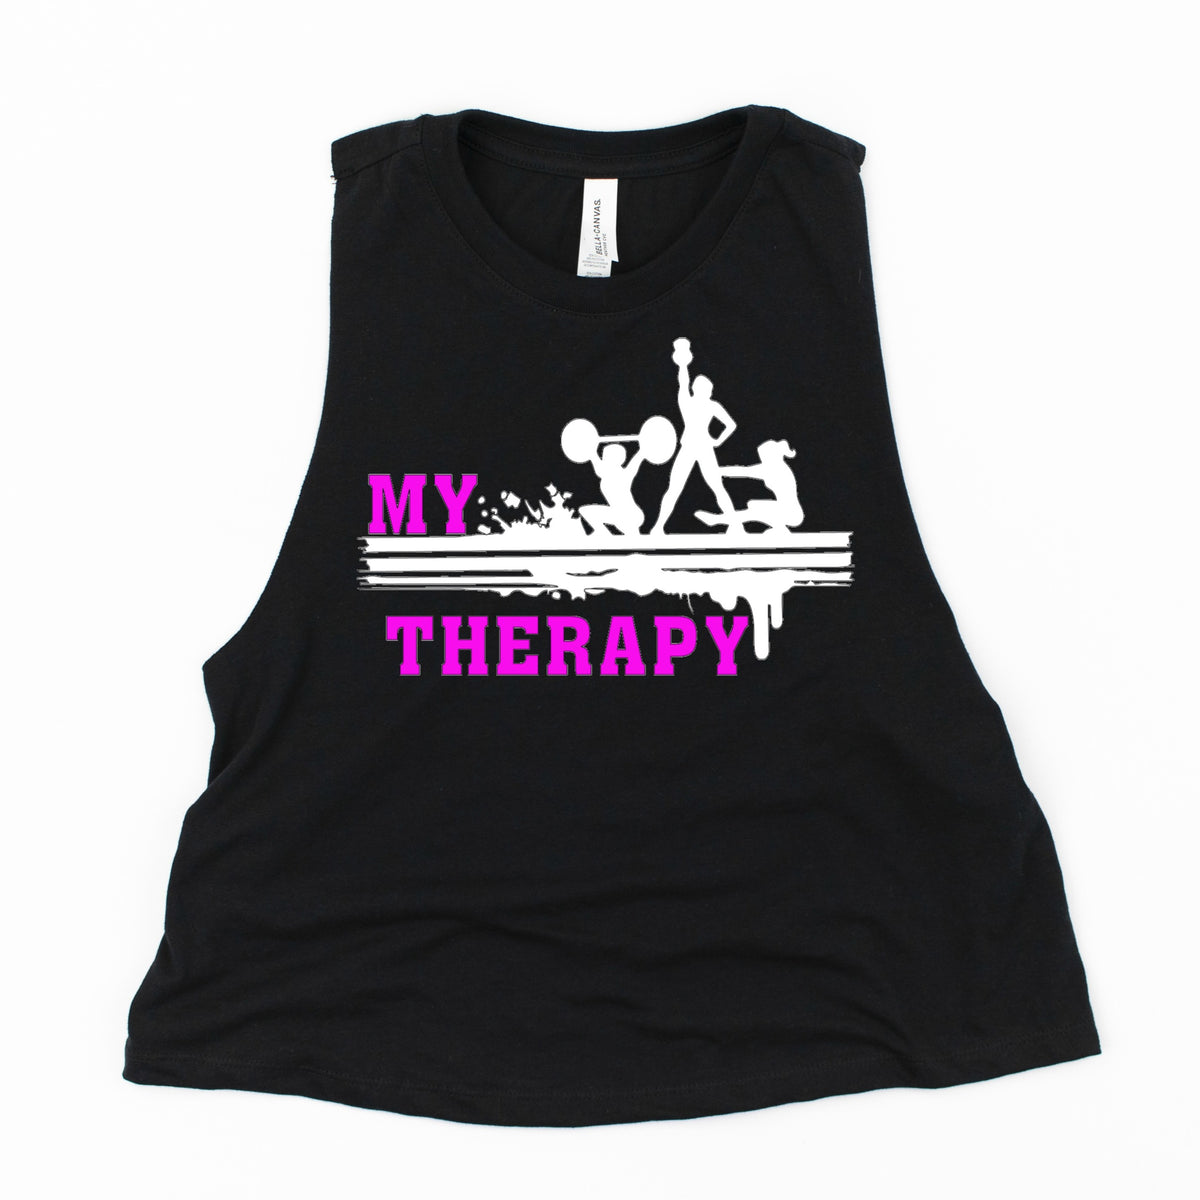 My Therapy Workout Tank, Weightlifting Tank Top, Crossfit Tank Top